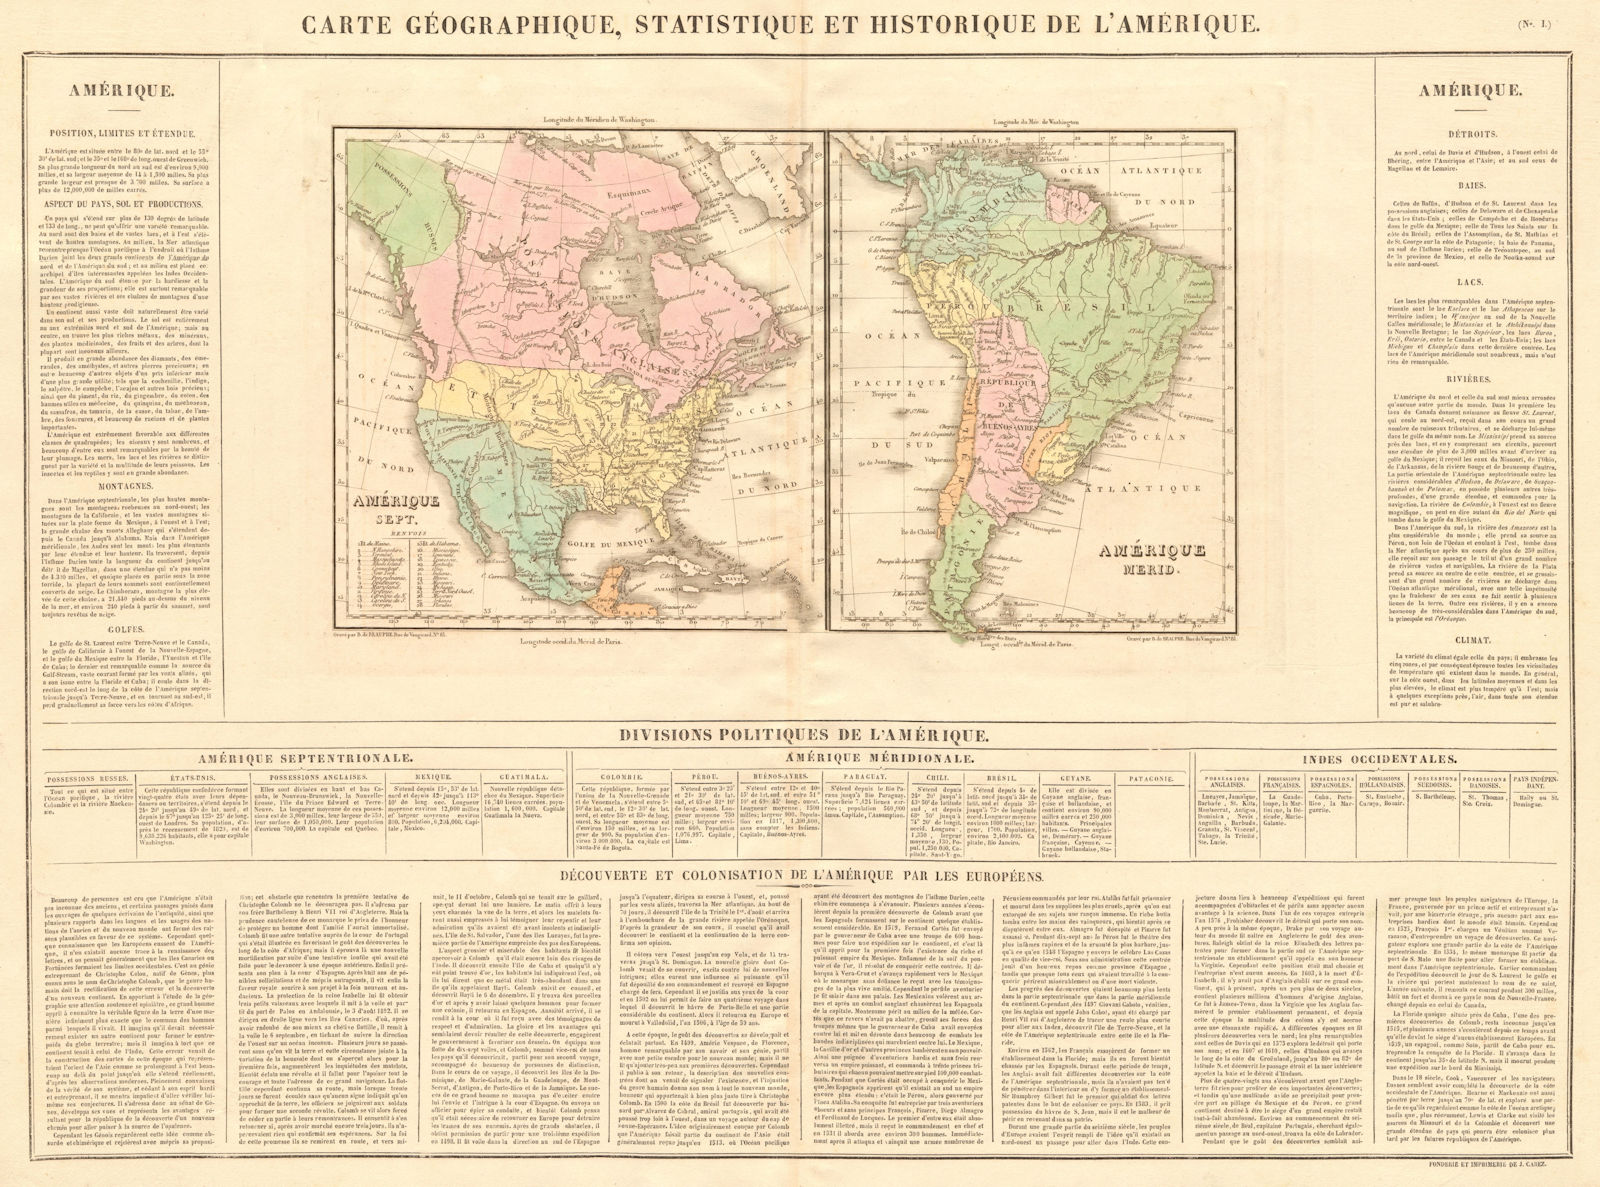 'L'Amerique'. North America & newly independent South America. BUCHON 1825 map